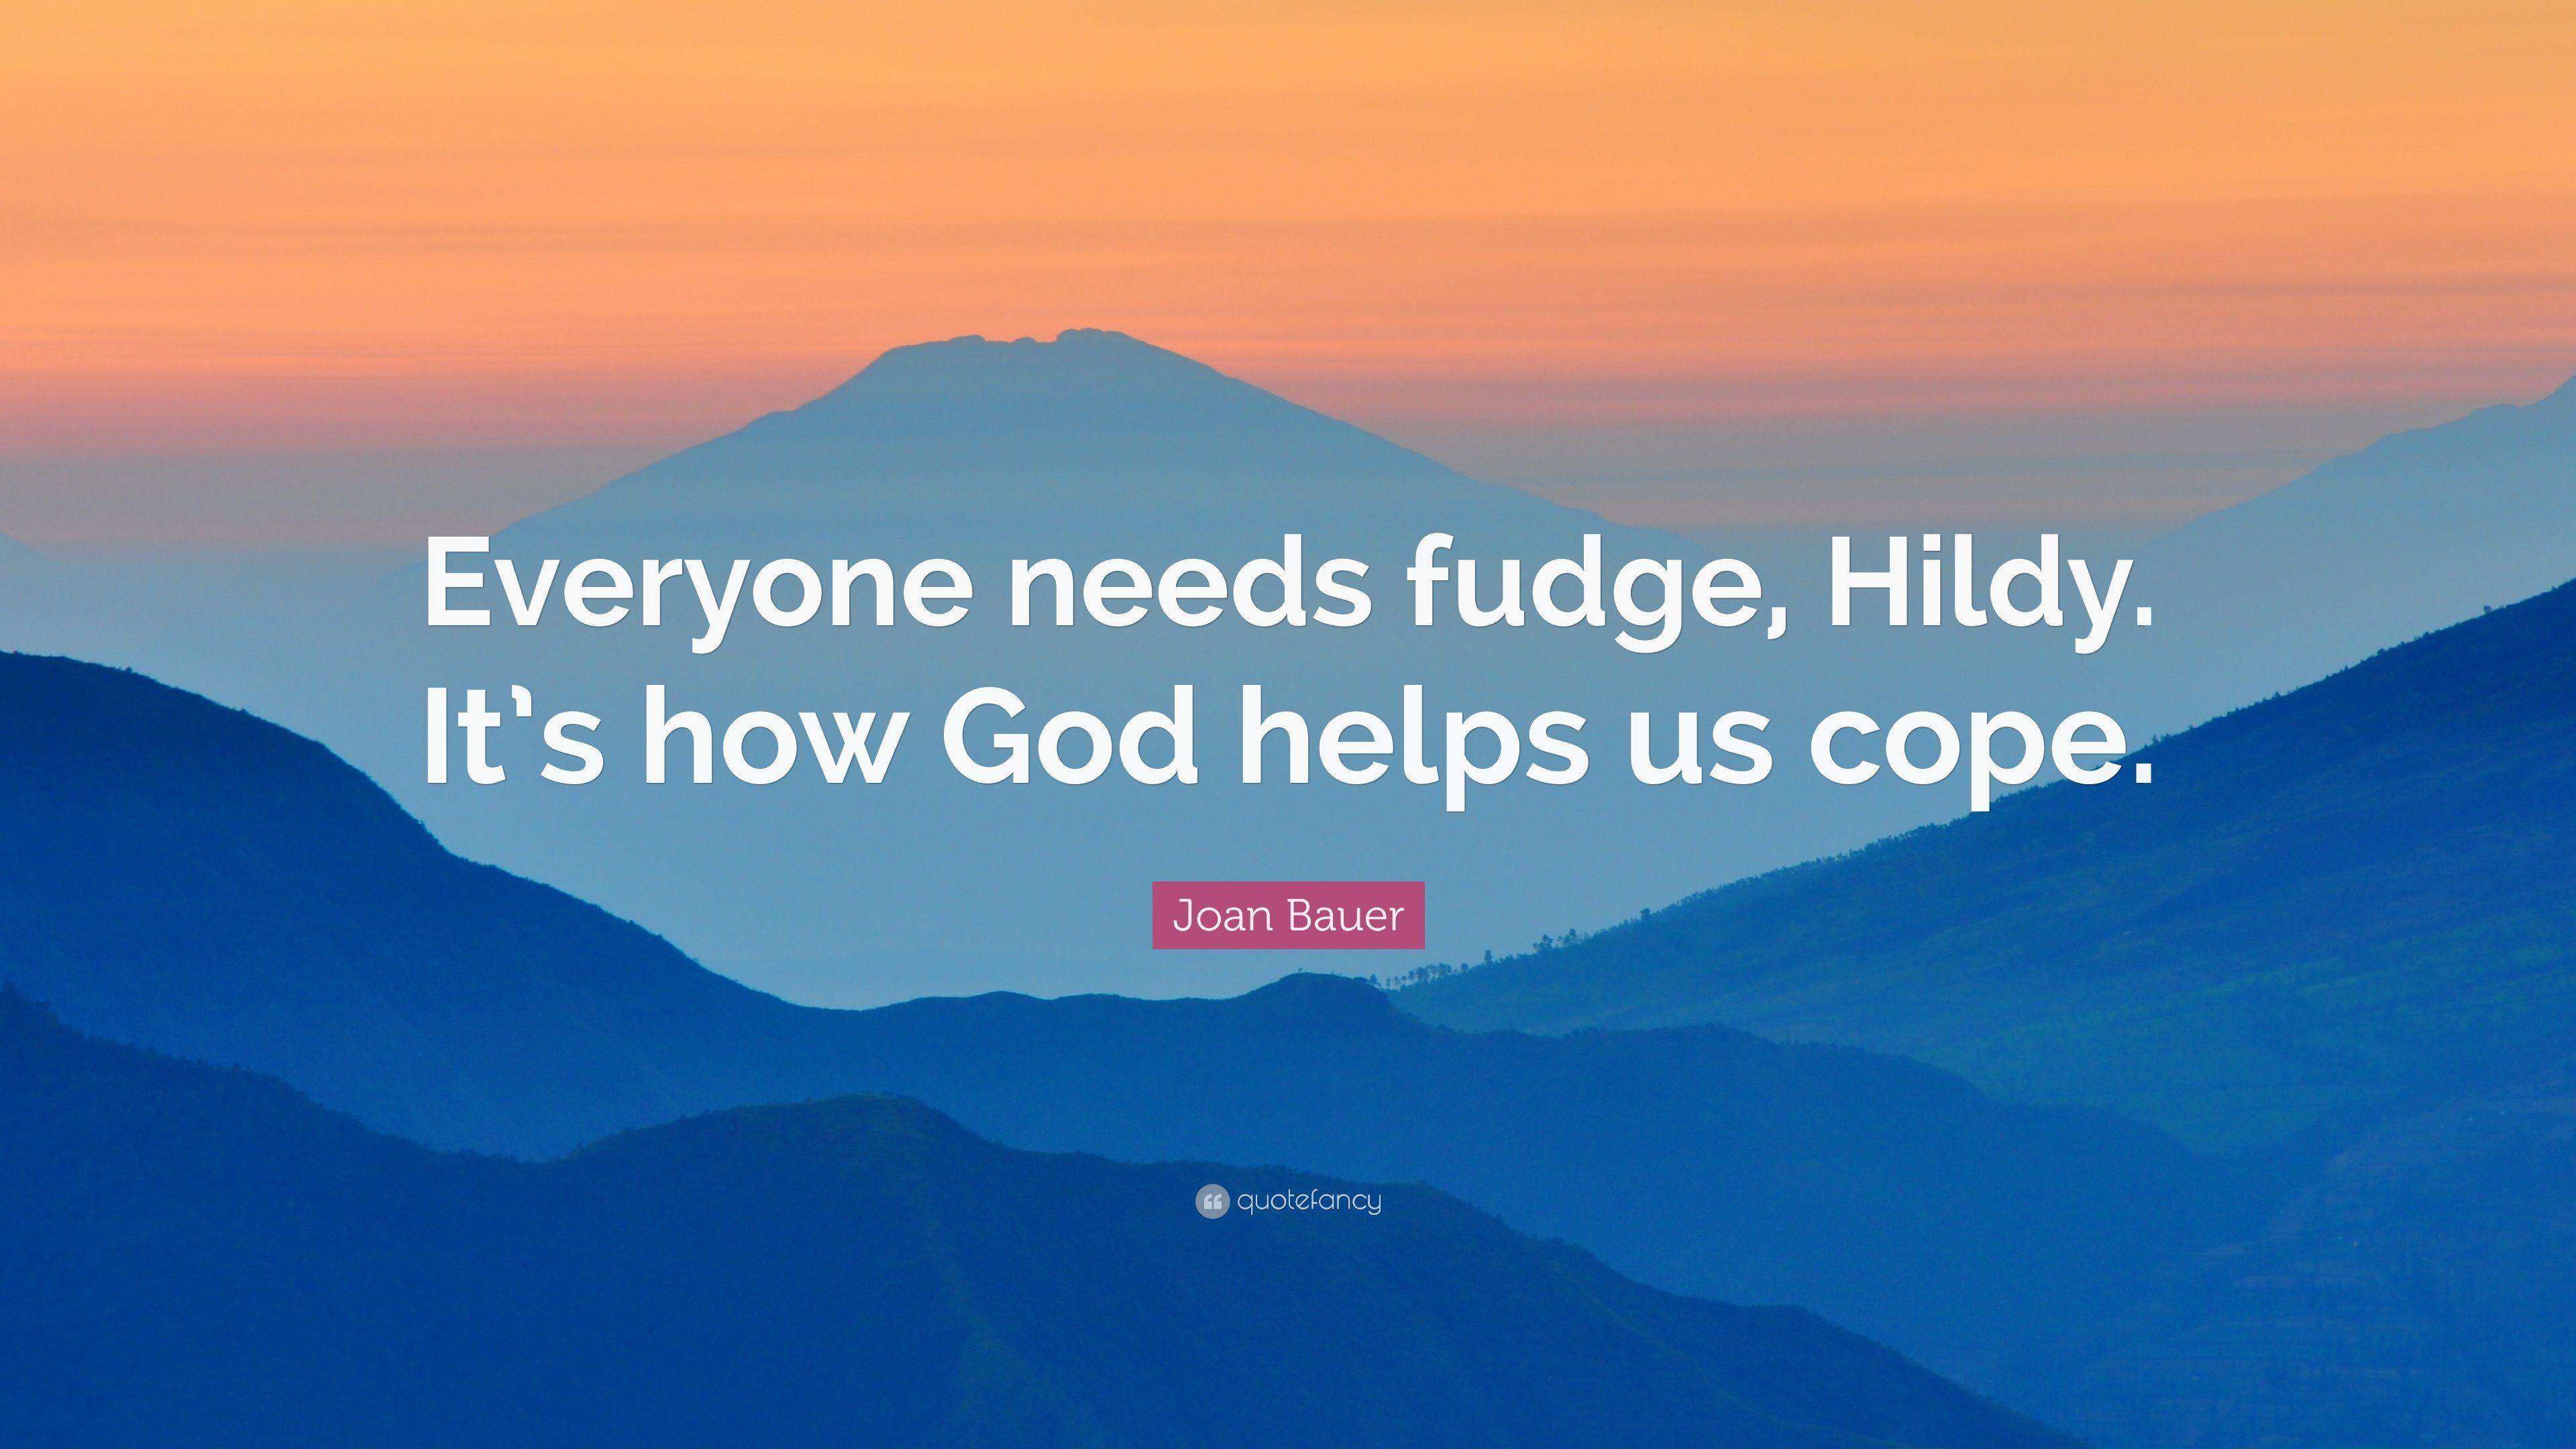 Joan Bauer Quote: “Everyone needs fudge, Hildy. It's how God helps